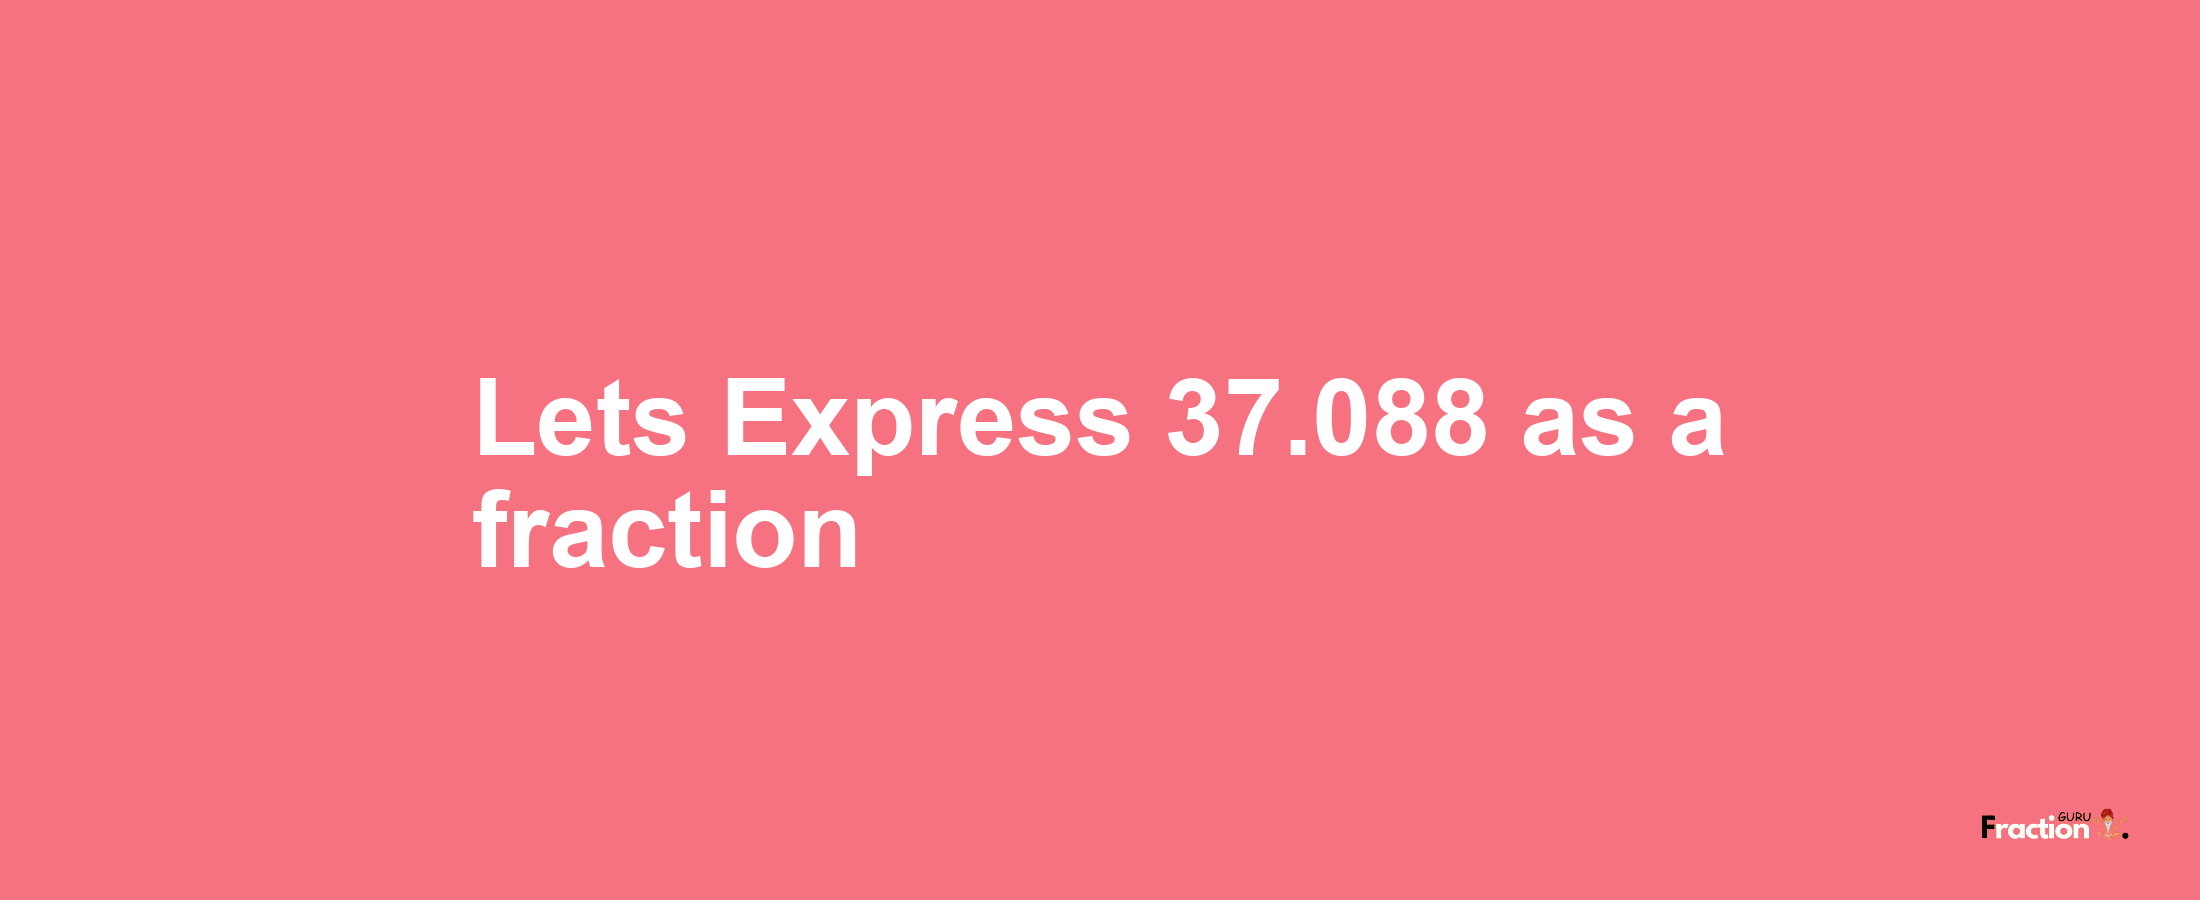 Lets Express 37.088 as afraction